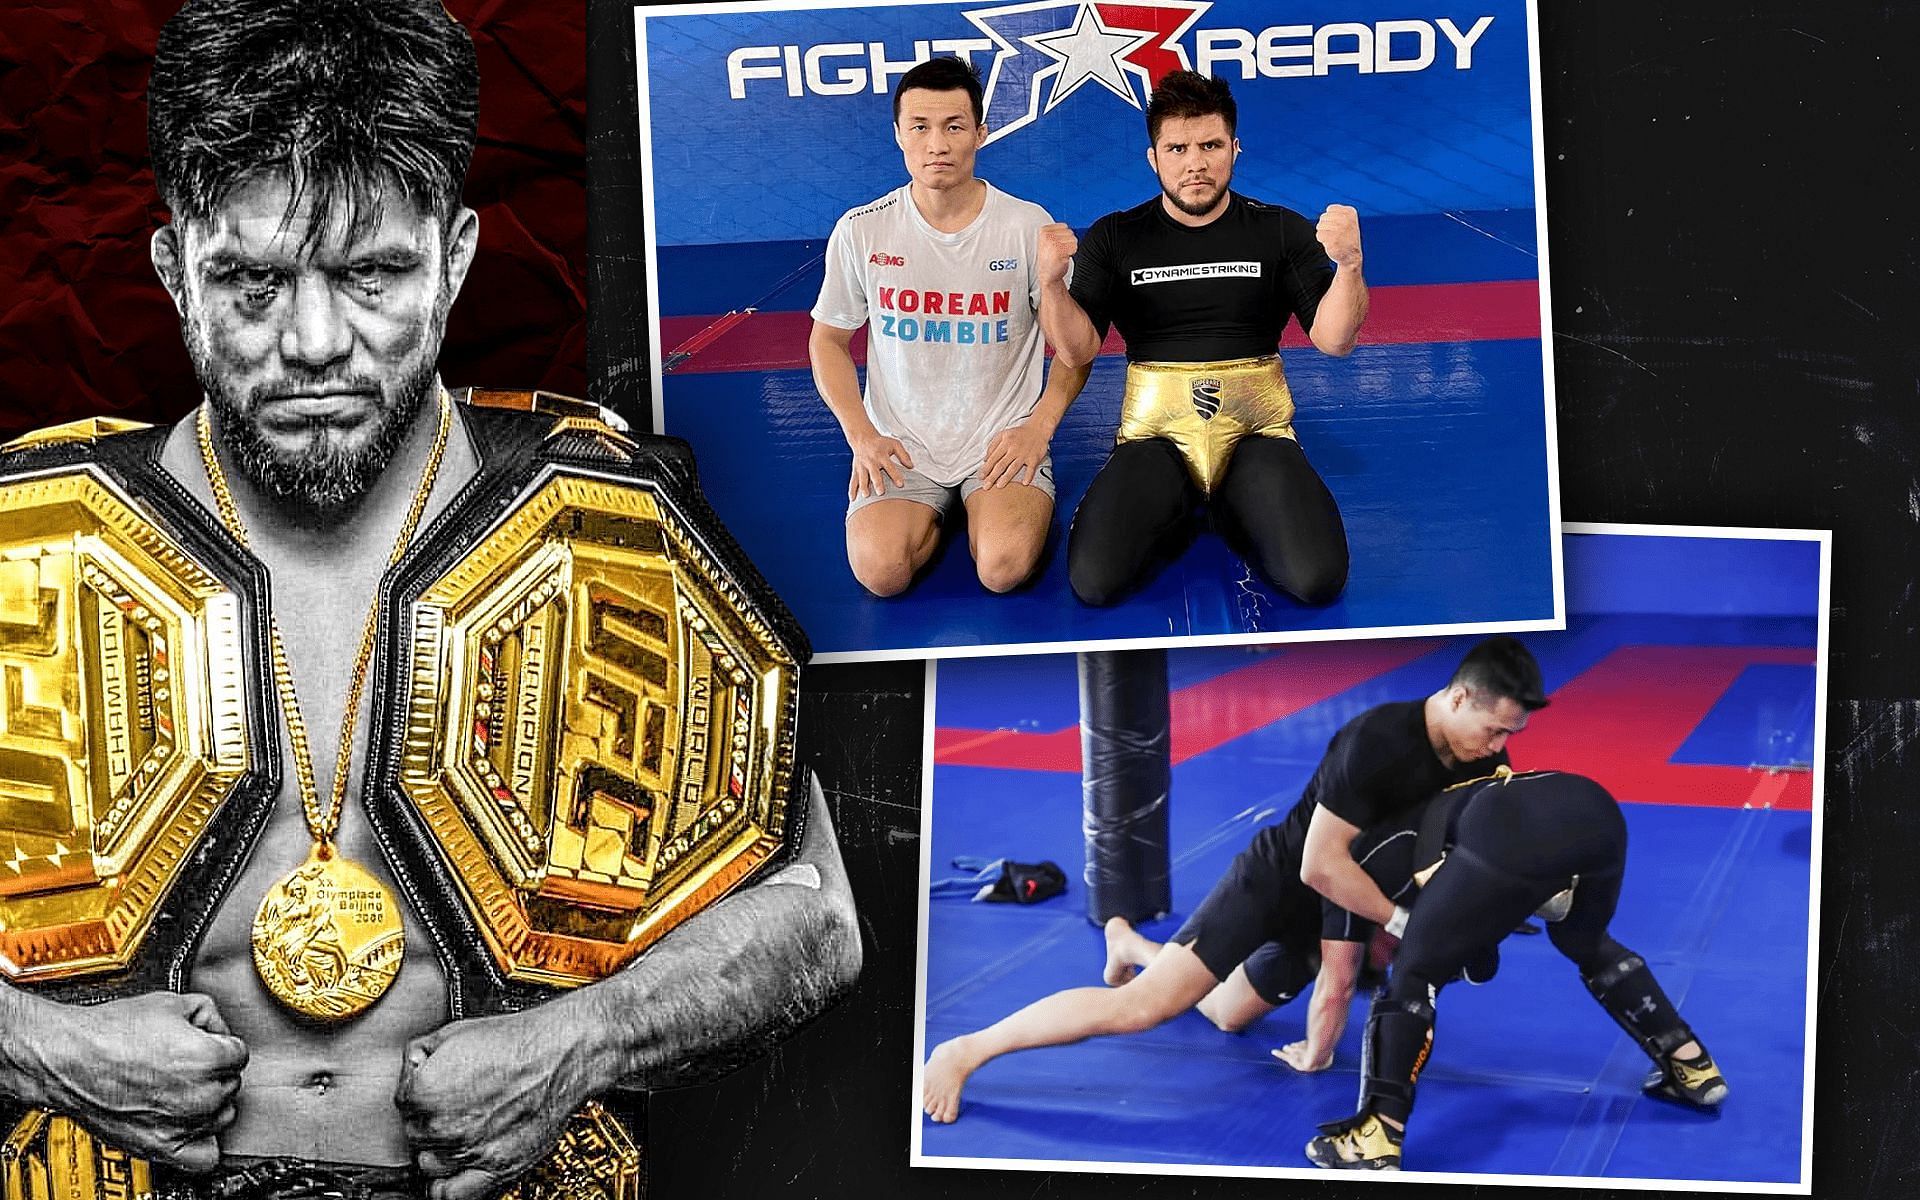 Henry Cejudo talks about training with Chan Sung Jung [Photo credits: YouTube.com and @henry_cejudo on Instagram]